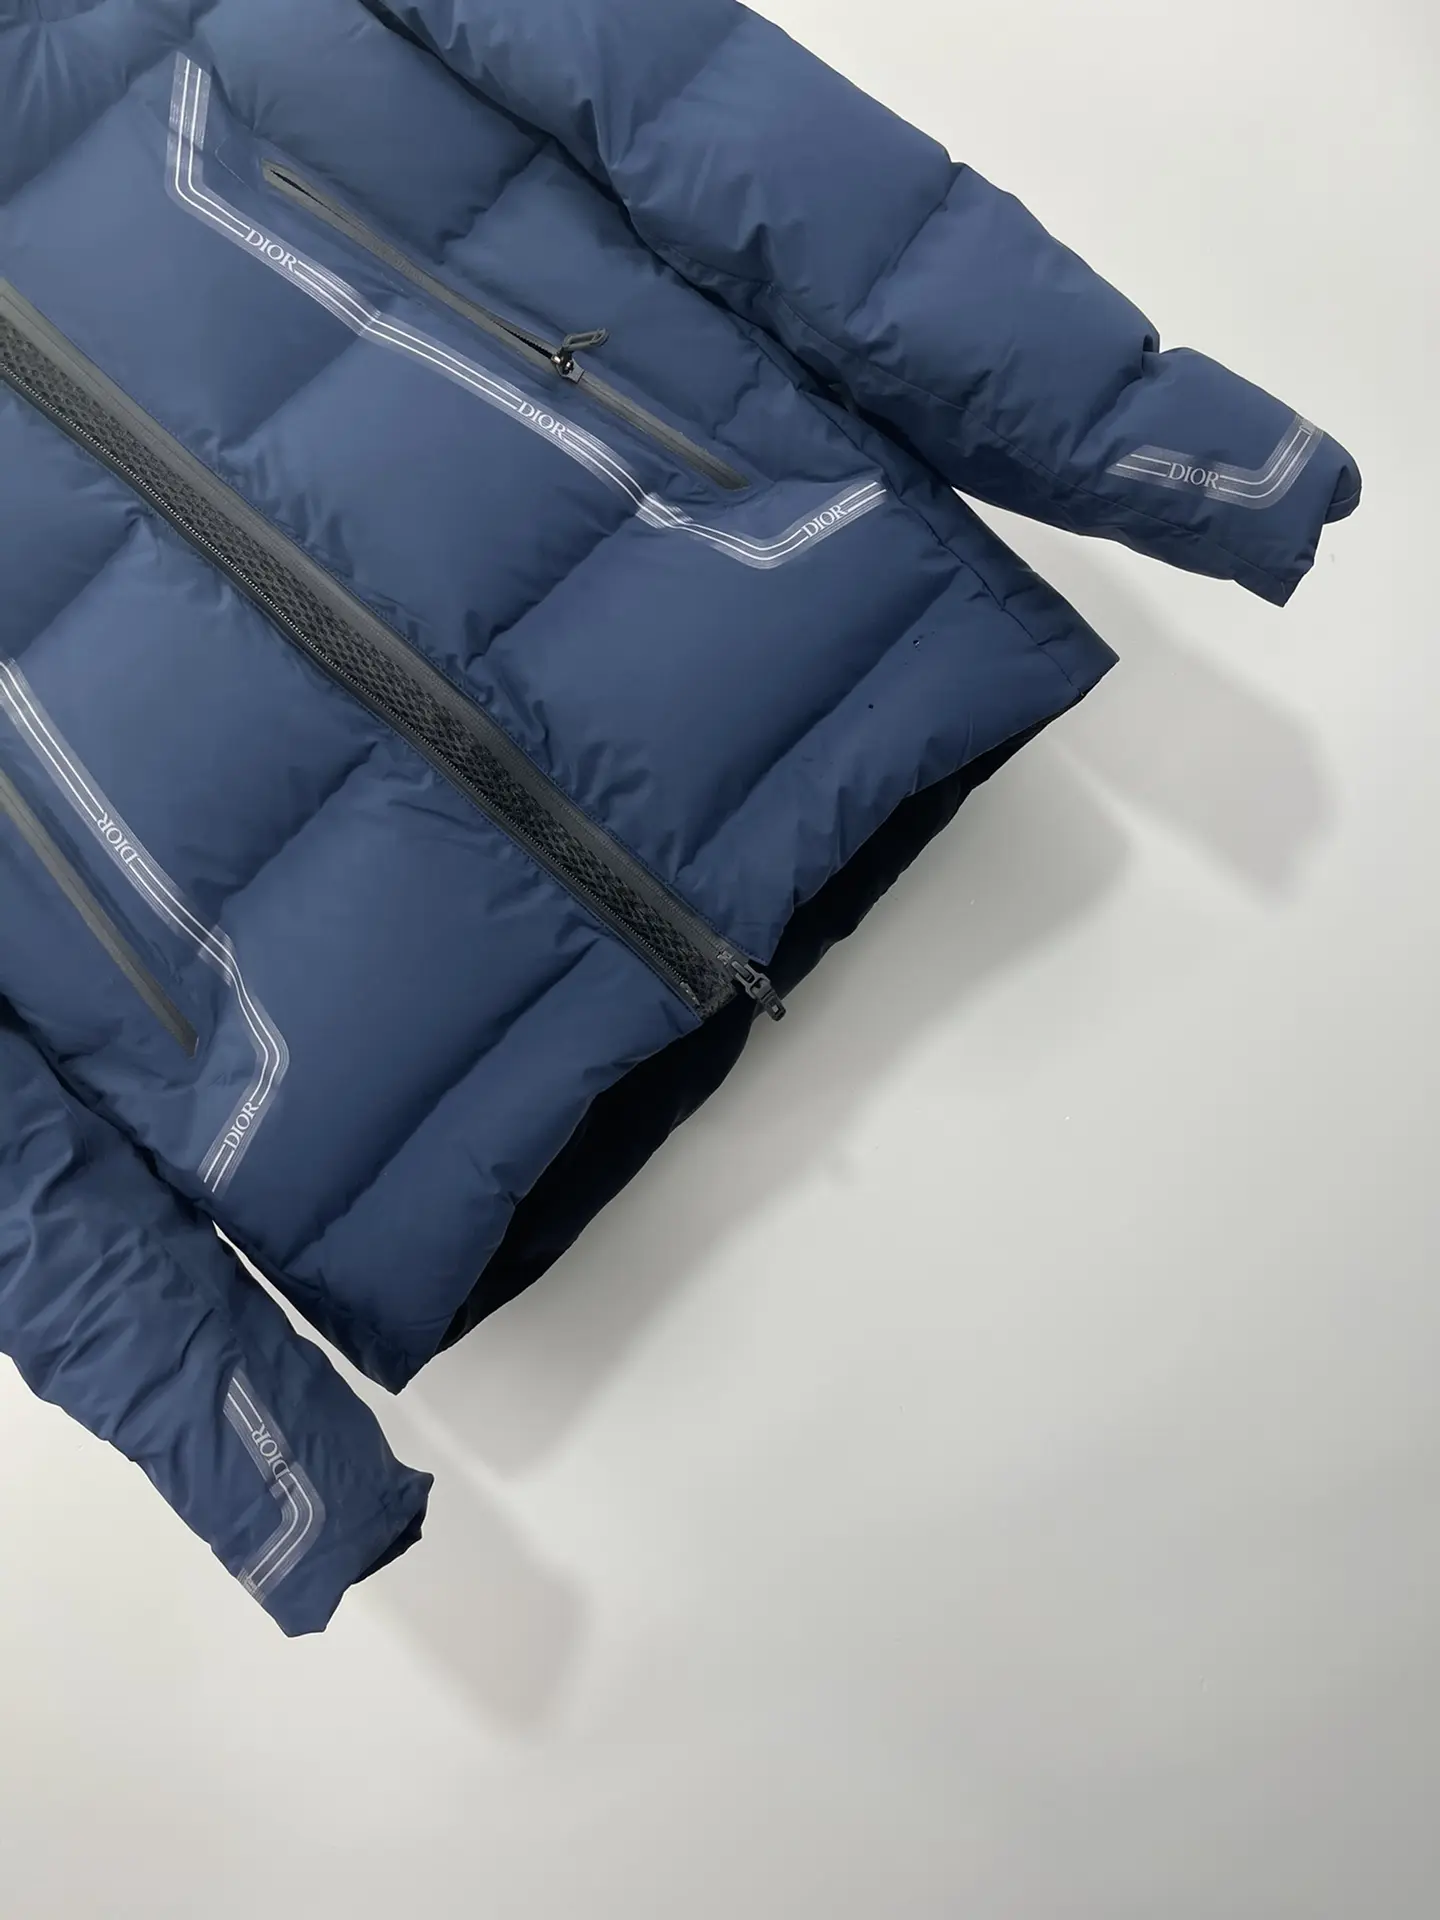 Dior 2022 new  down jacket in blue